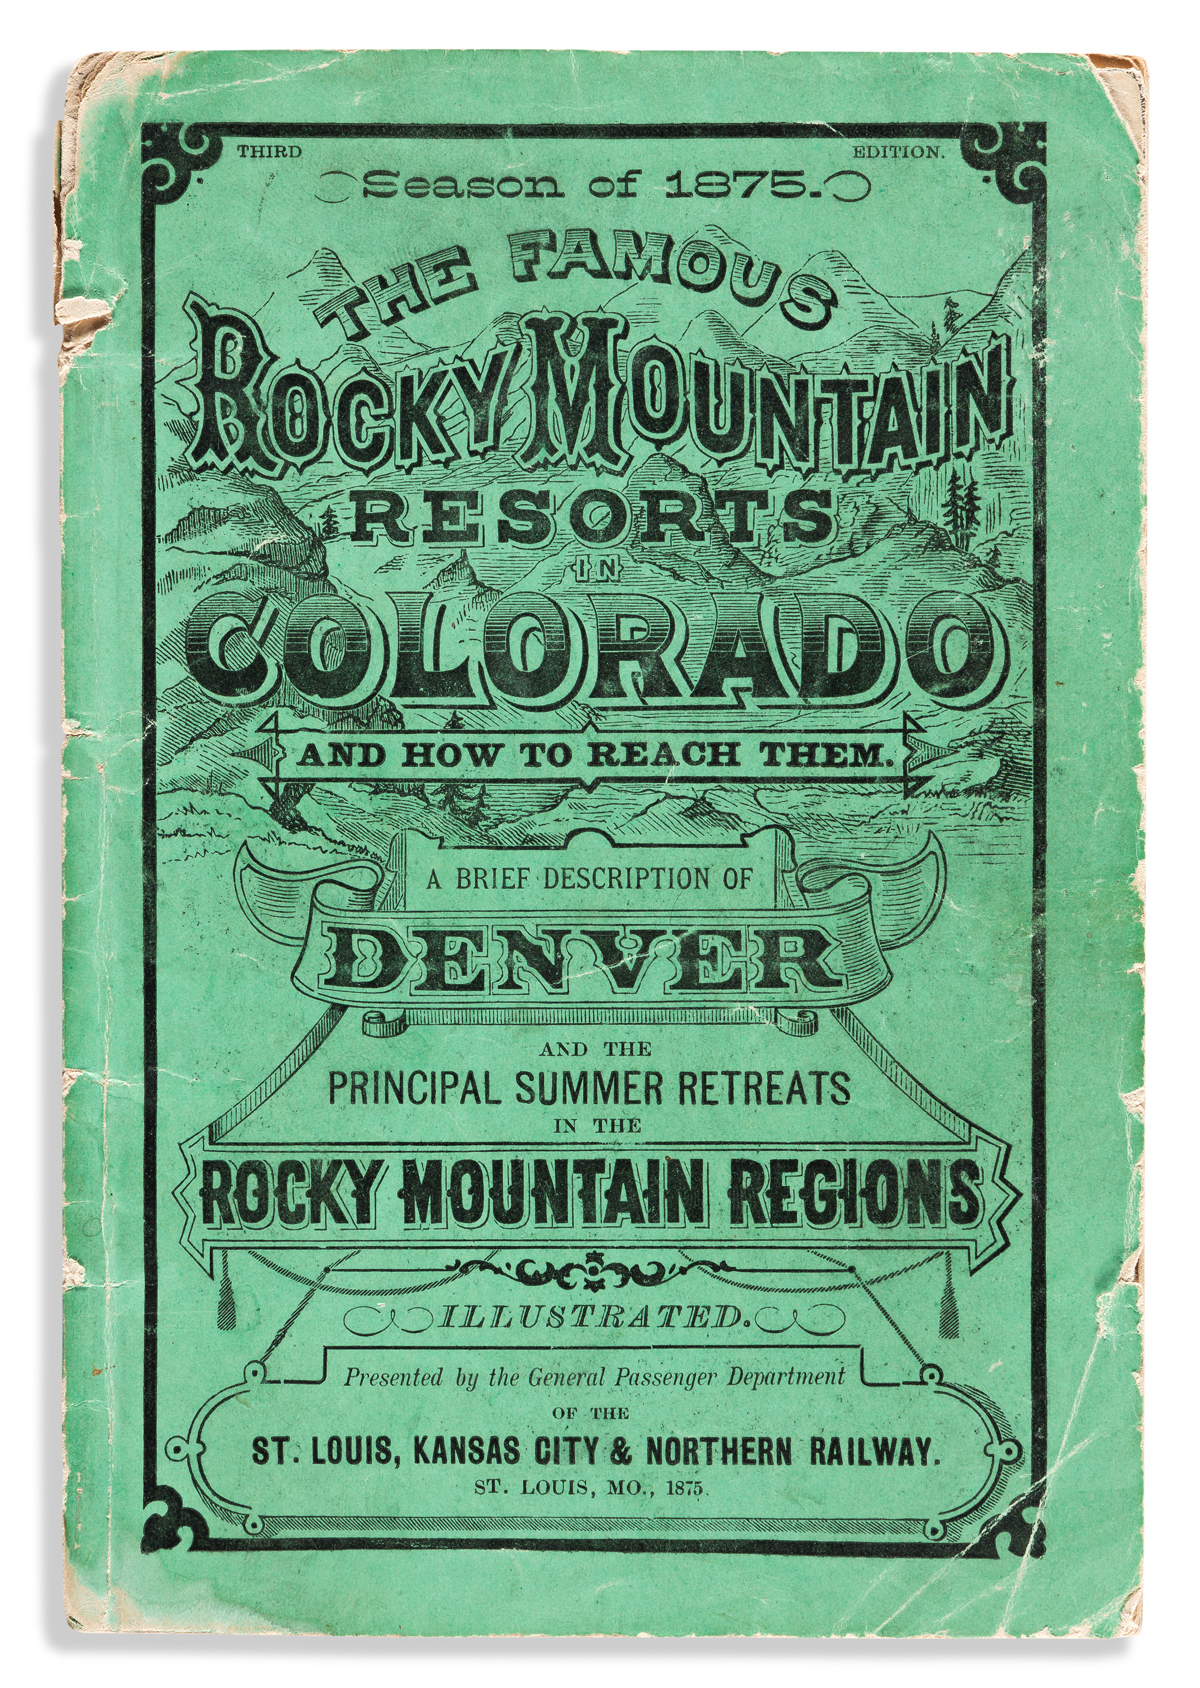 (WEST--COLORADO.) Season of 1875: A Brief Description of the Famous Rocky Mountain Resorts in Colorado, and How to Reach Them.